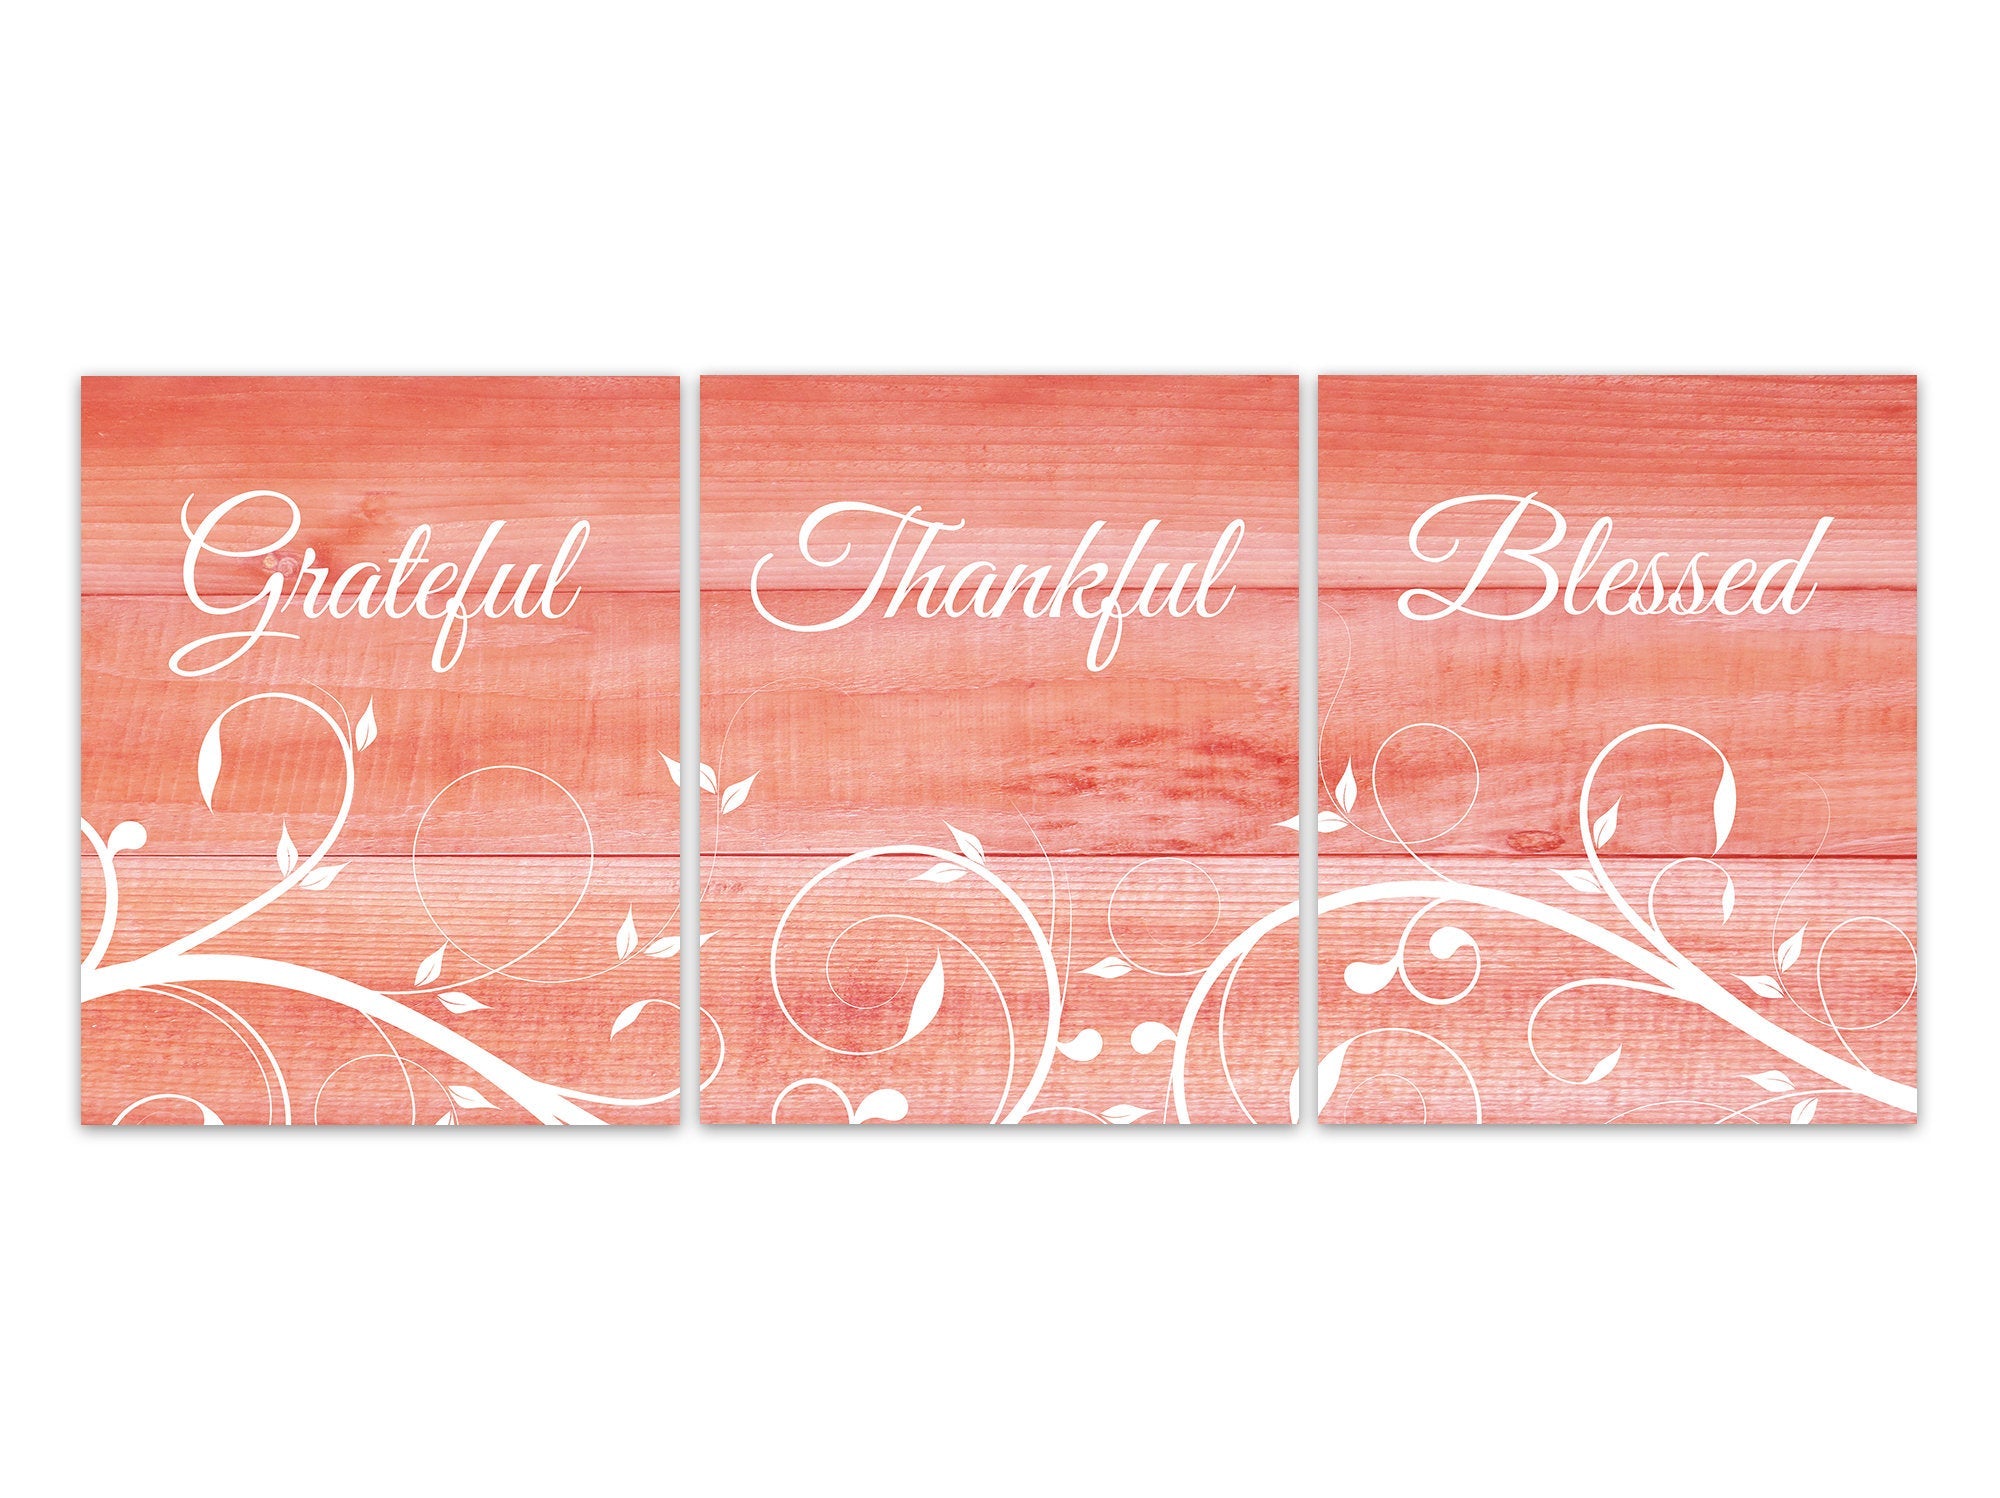 Grateful Thankful Blessed, Coral Home Decor Prints, Farmhouse Wall Art, Blessing Signs, Wedding Gift, Coral Kitchen CANVAS - HOME583